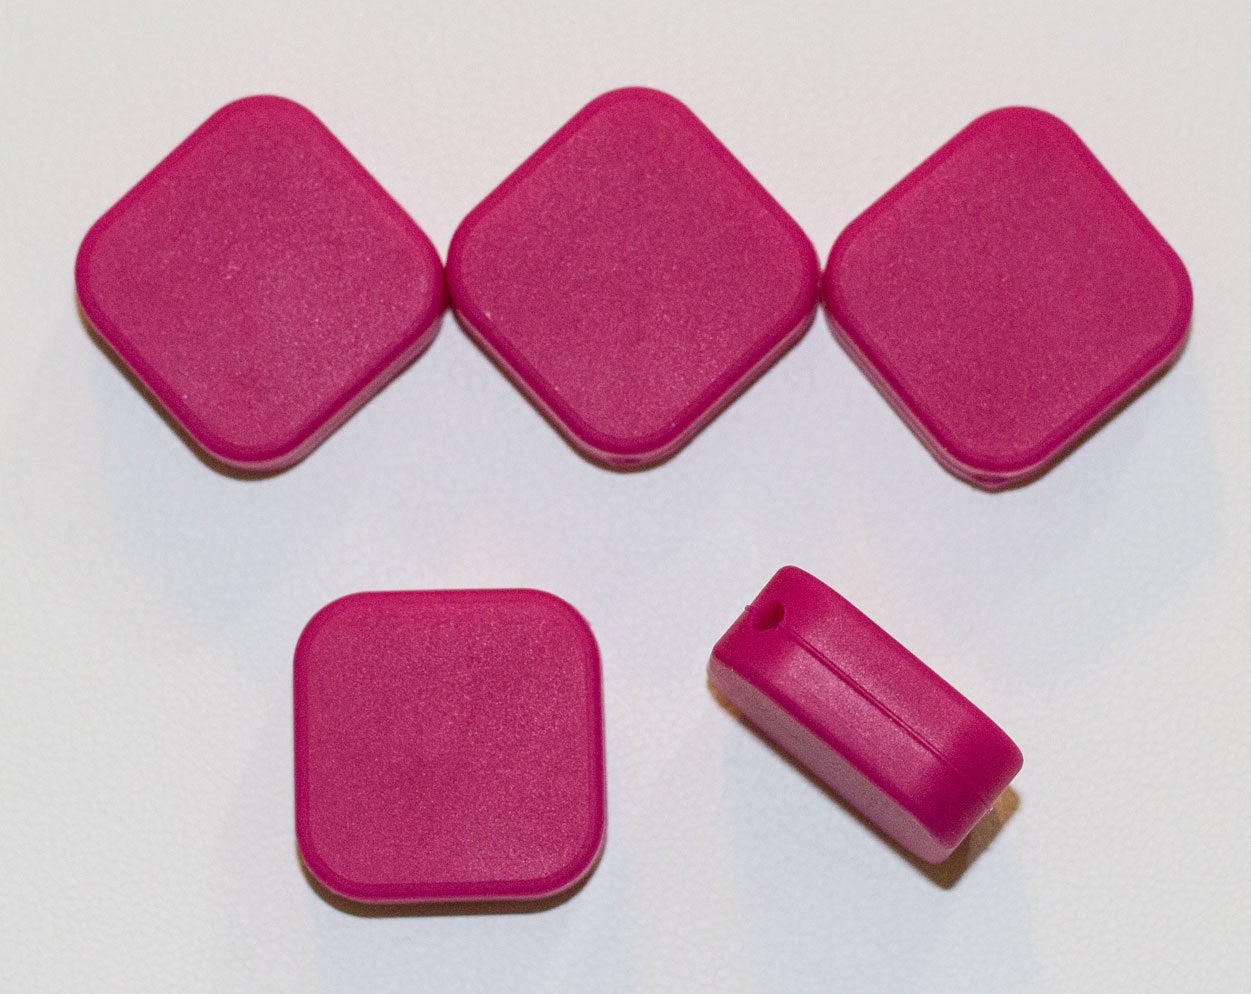 SALE - 1-5 Tile Silicone Beads in Berry - Square with Rounded Edges - 20 mm x 20 mm x 8 mm